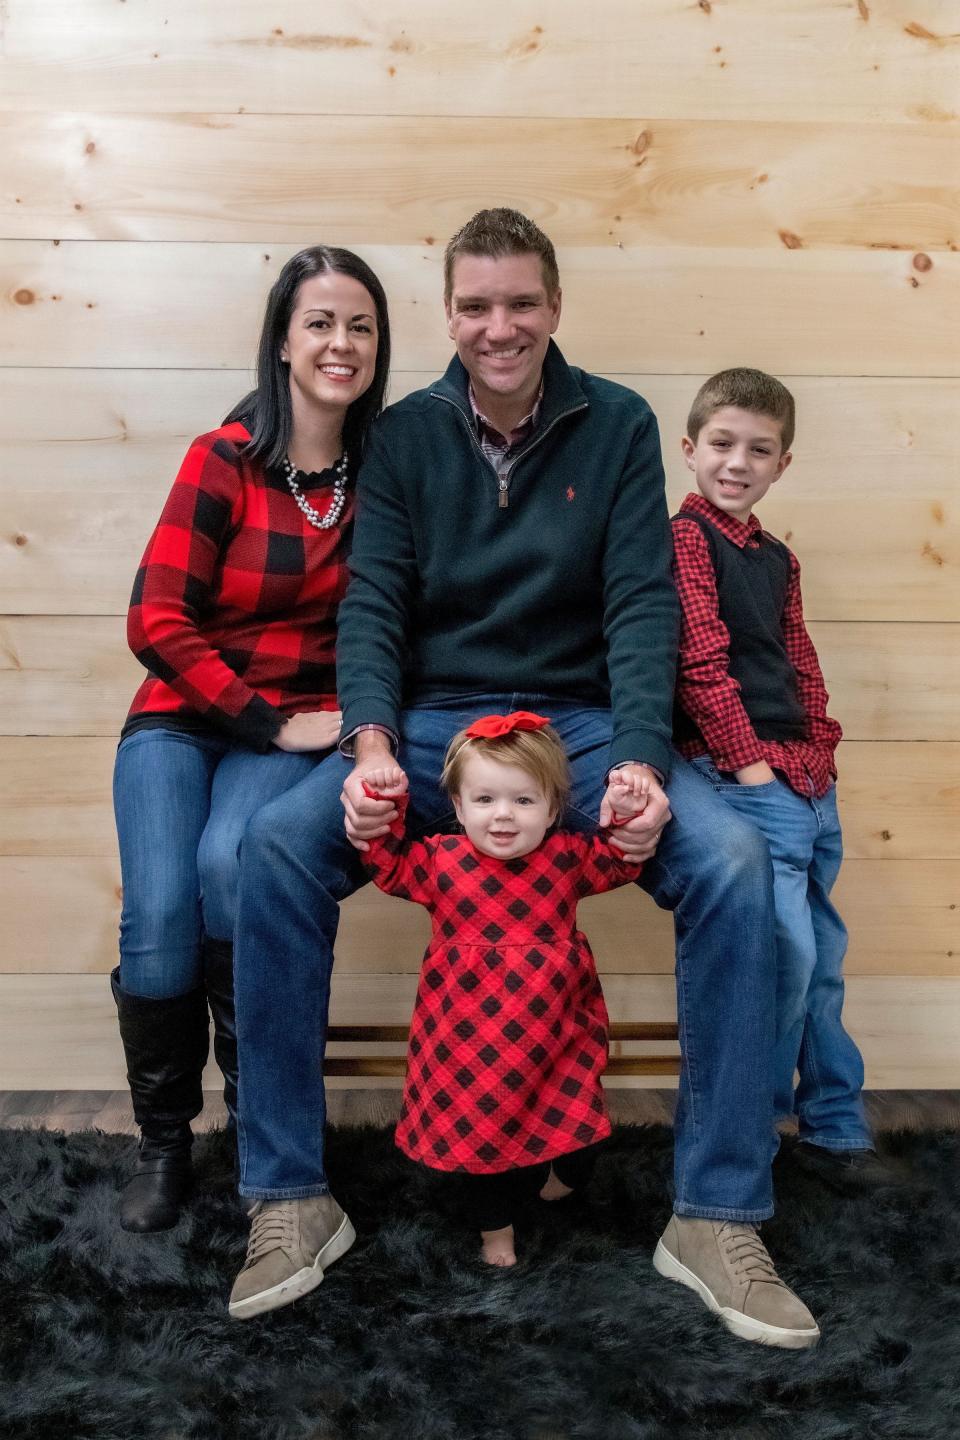 Misti and Aaron Allison and their children, Blake and Audrey, were among East Palestine, Ohio, residents forced to evacuate after a train carrying hazardous materials derailed Feb. 3, 2023.